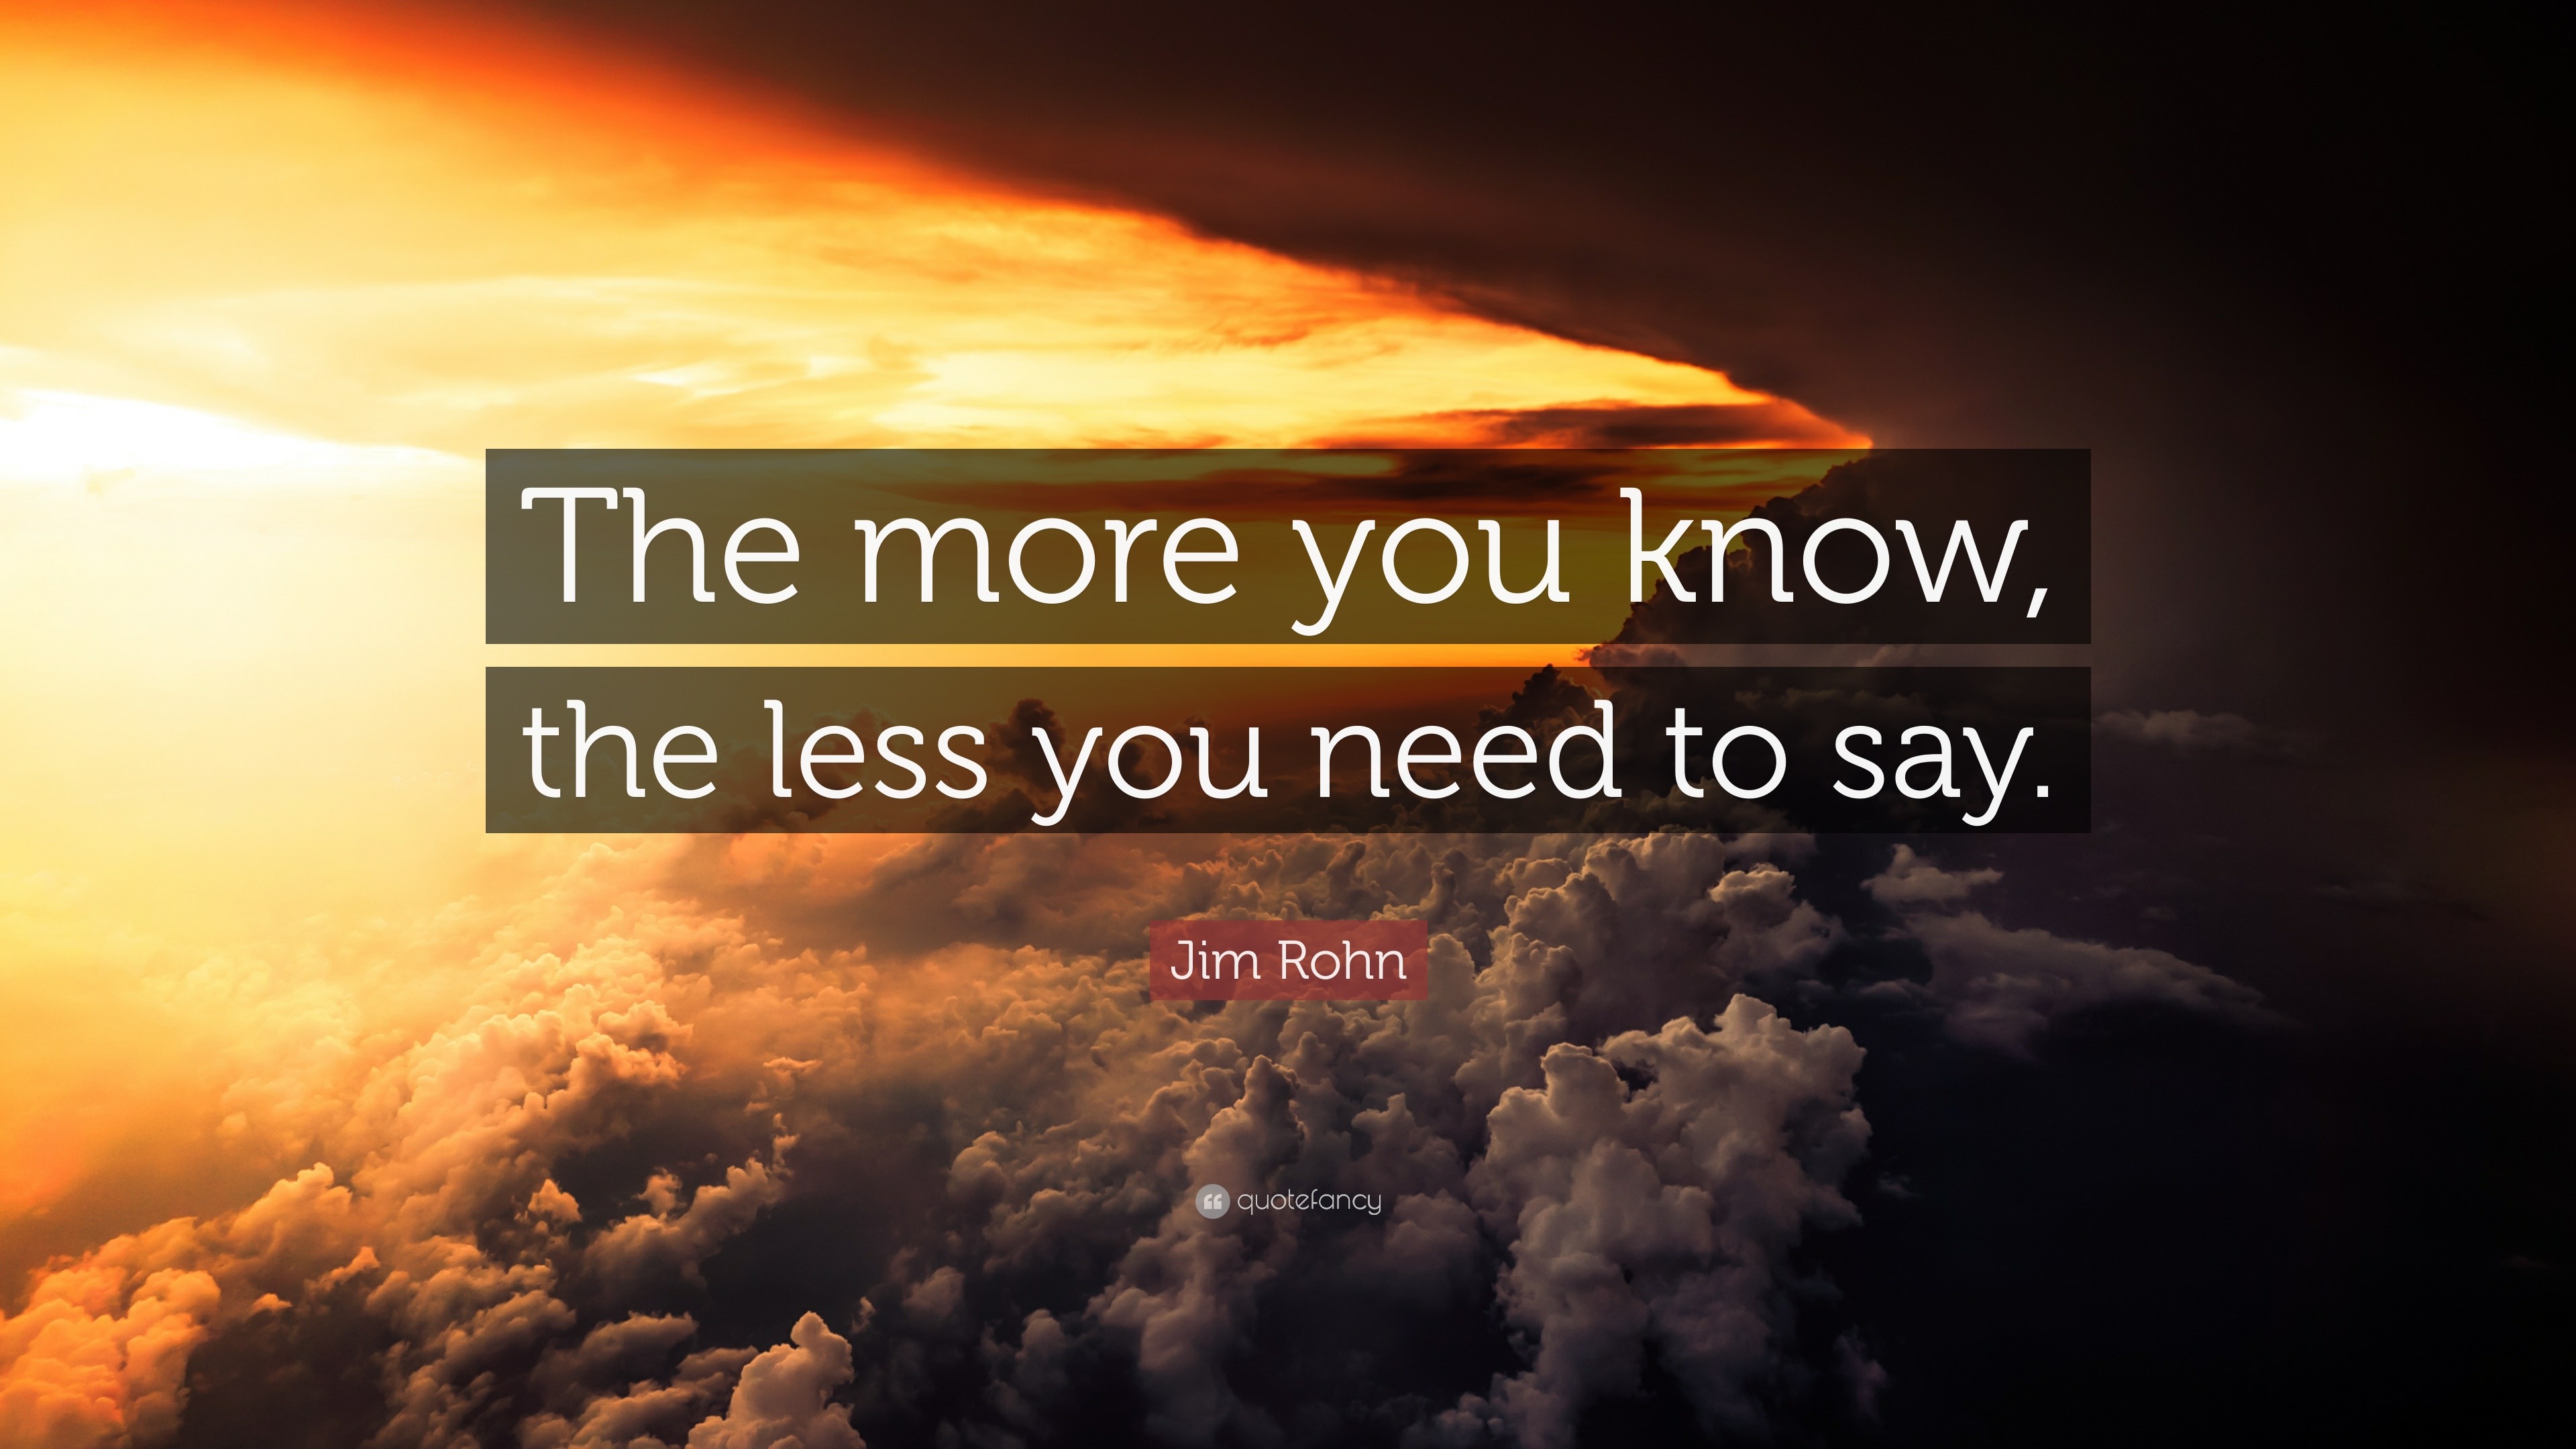 Jim Rohn Quote: “The more you know, the less you need to say.” (17